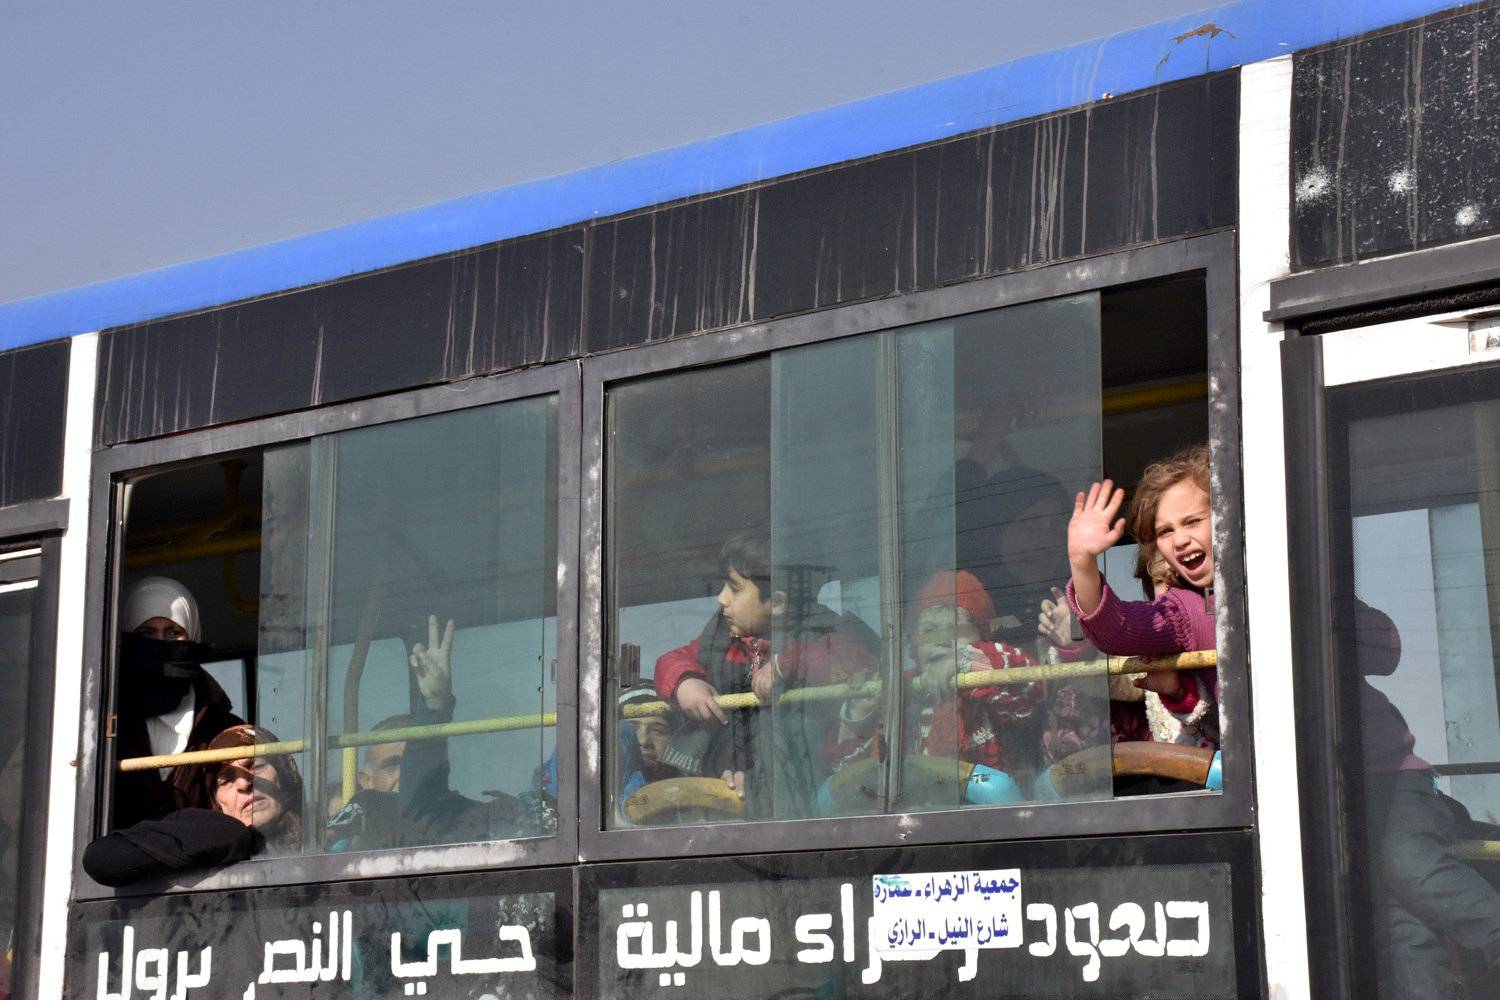 People who fled the Shi'ite Muslim villages of al-Foua and Kefraya arrive in government controlled Jibreen area in Aleppo